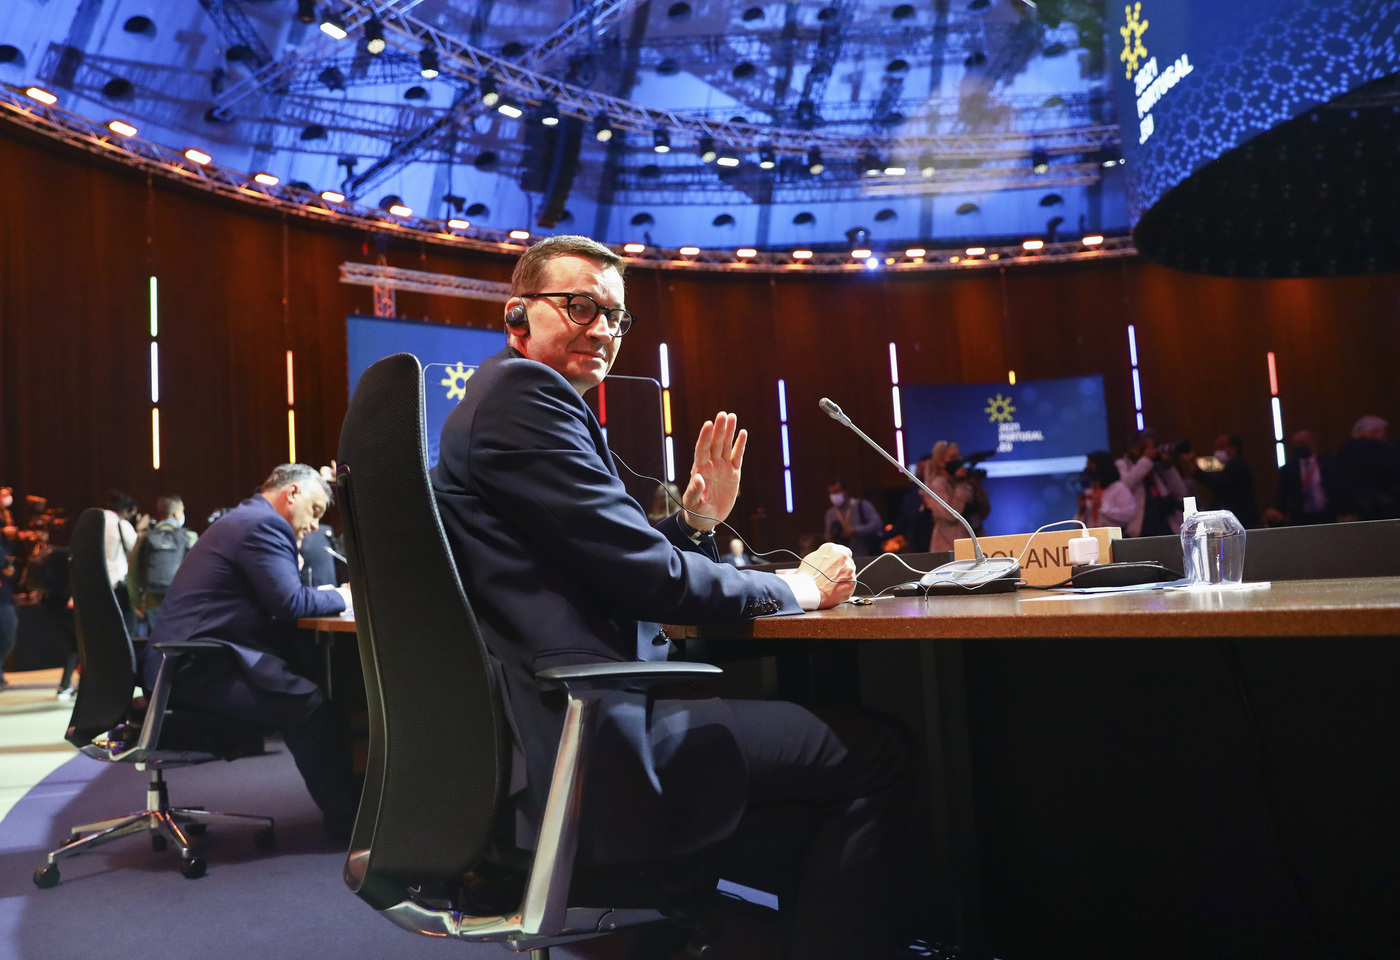 Poland's Prime Minister Mateusz Morawiecki waves during an EU summit round table meeting at the Crystal Palace in Porto, Portugal, Saturday, May 8, 2021. On Saturday, EU leaders hold an online summit with India's Prime Minister Narendra Modi, covering trade, climate change and help with India's COVID-19 surge. (Violeta Santos Moura, Pool via AP)